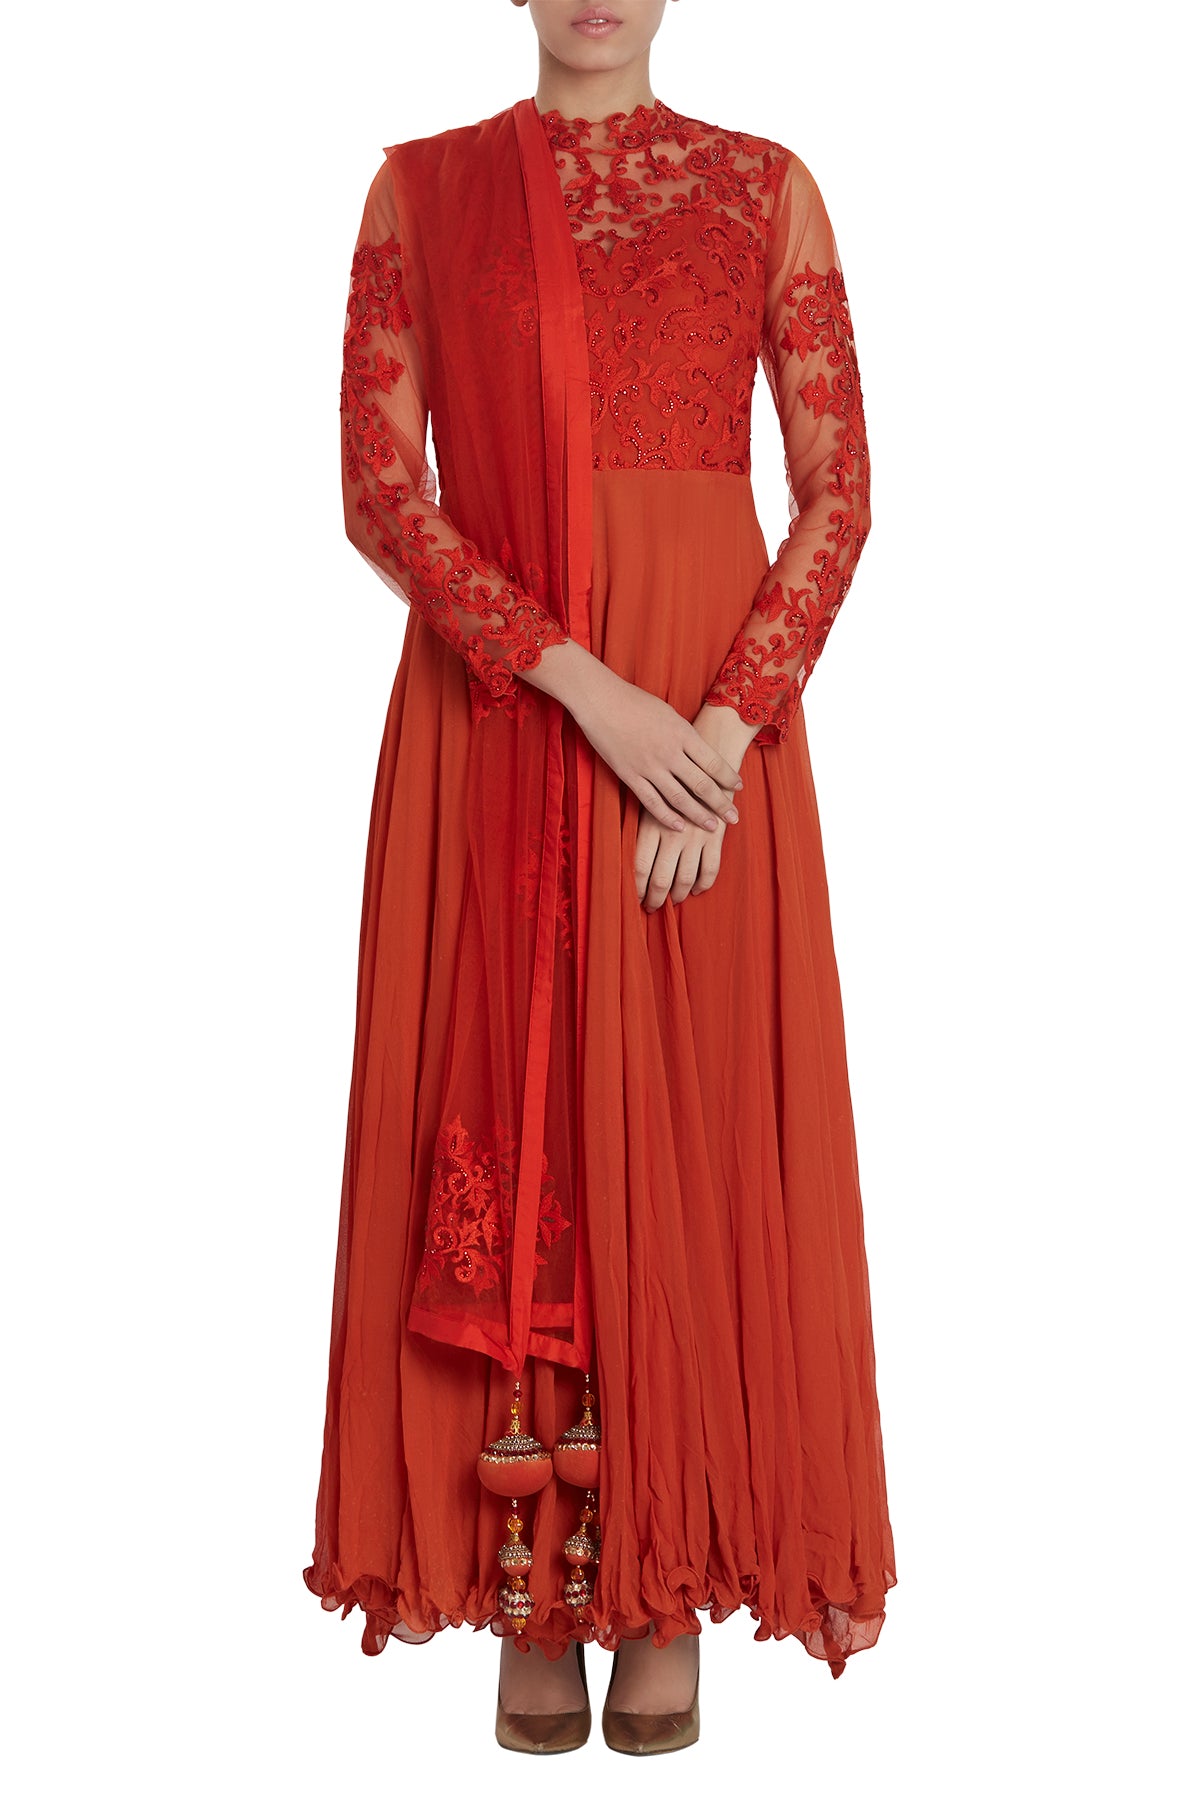 Get all meshed up in style and own the night with this red full-length high neck anarkali with a fully embroidered front, back and sleeves.